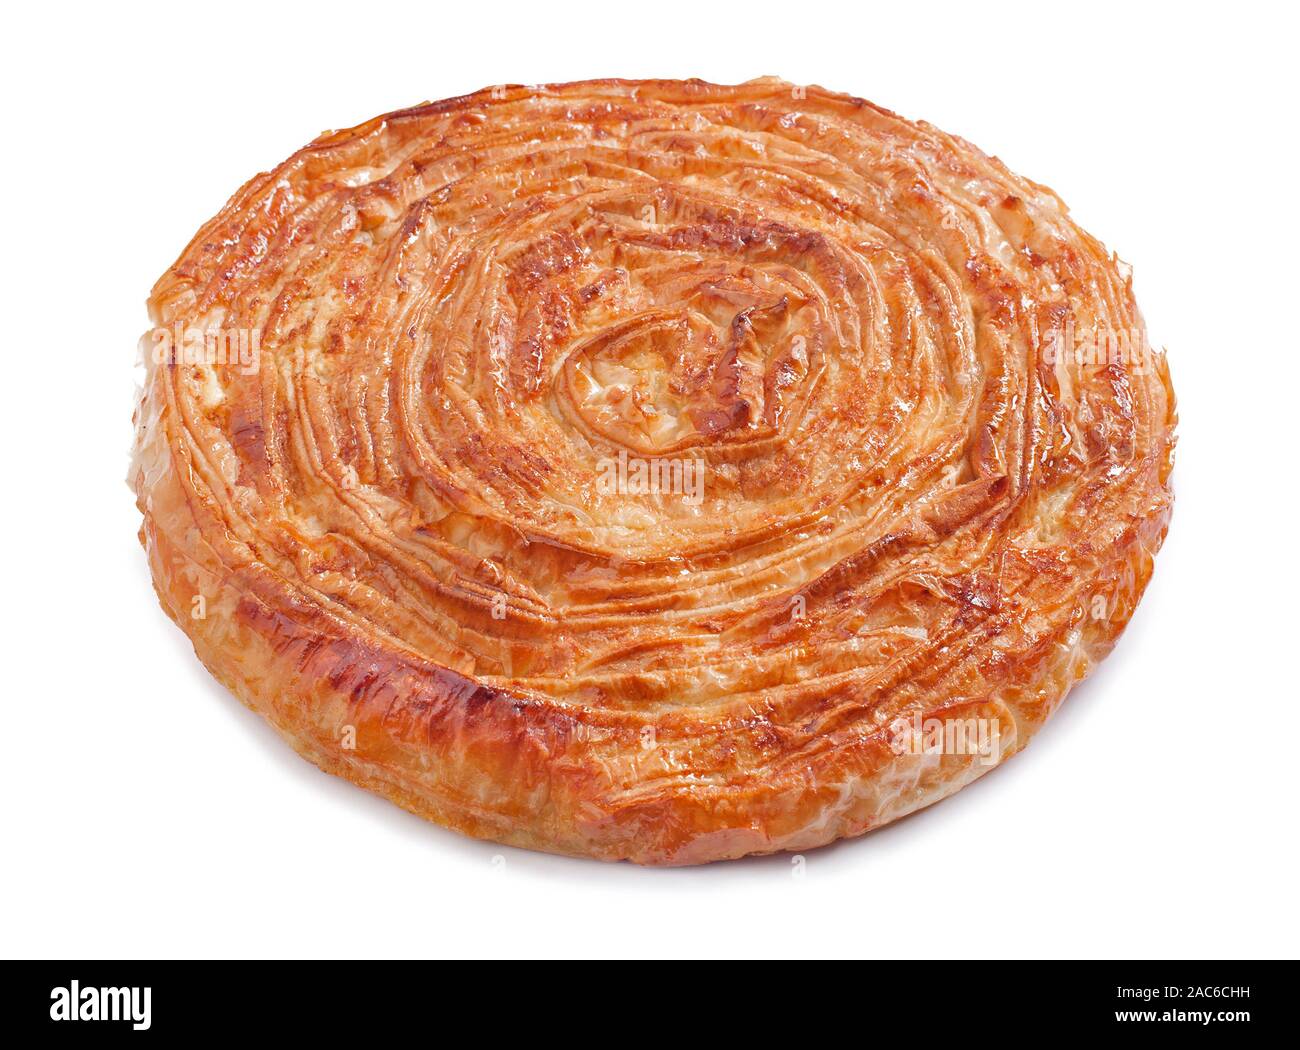 Home made cheese pie on white background Stock Photo